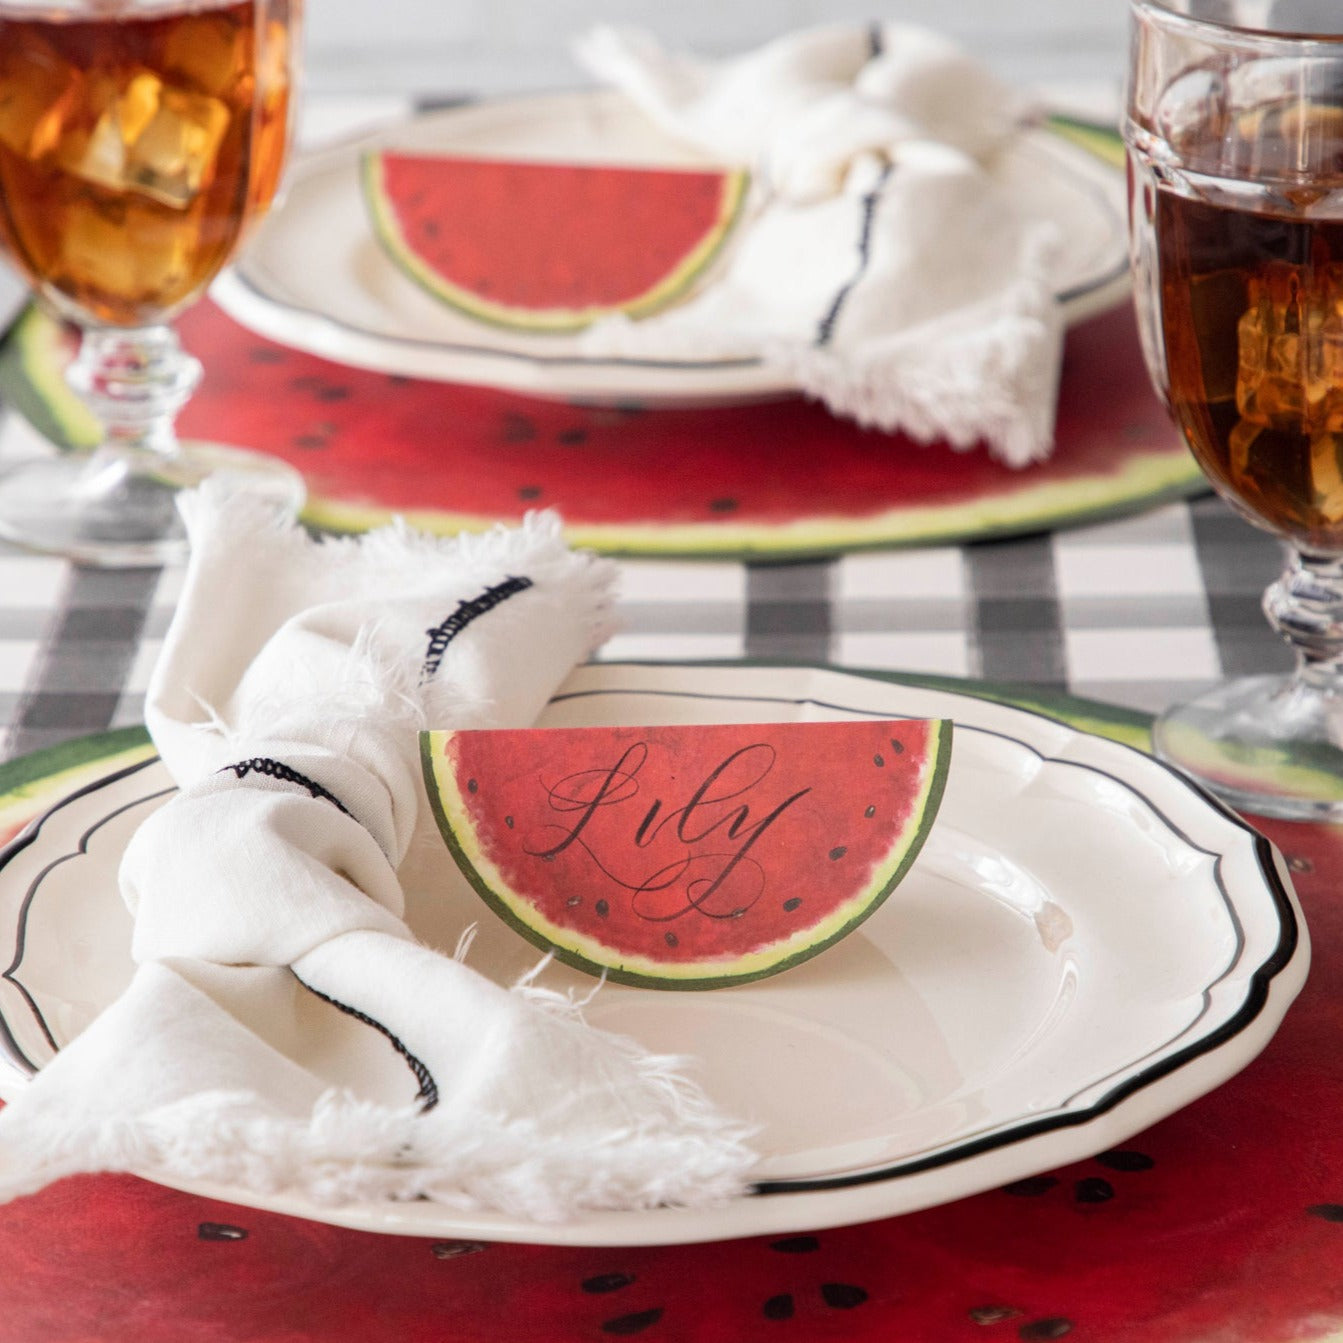 The Die-cut Watermelon Placemat under an elegant table setting.